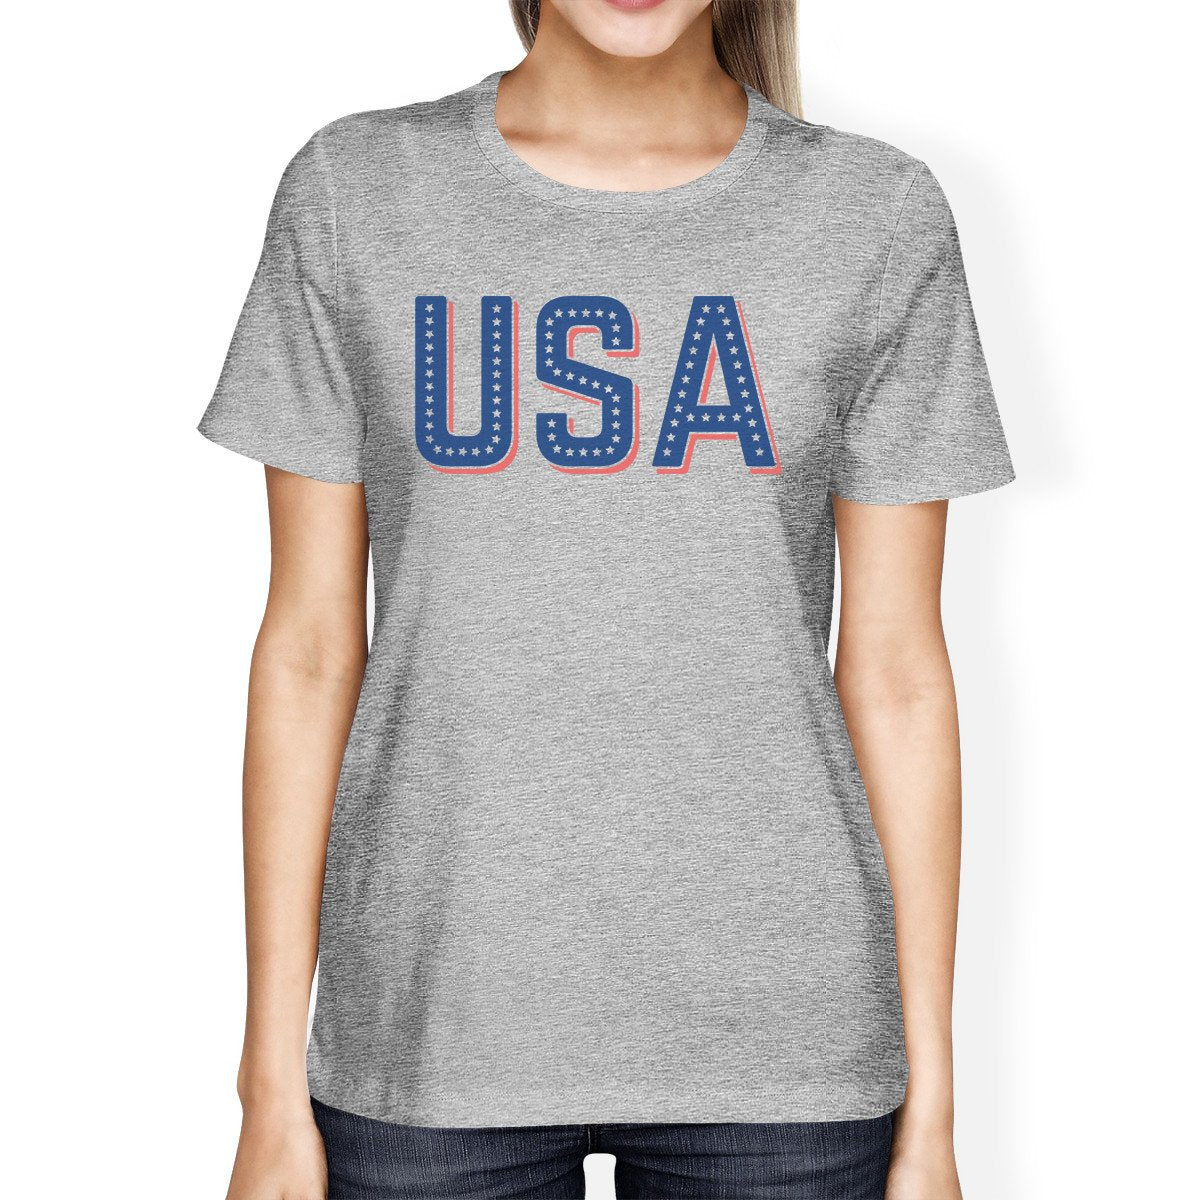 USA With Stars Unique USA Letter Printed Womens Short Sleeve Shirt